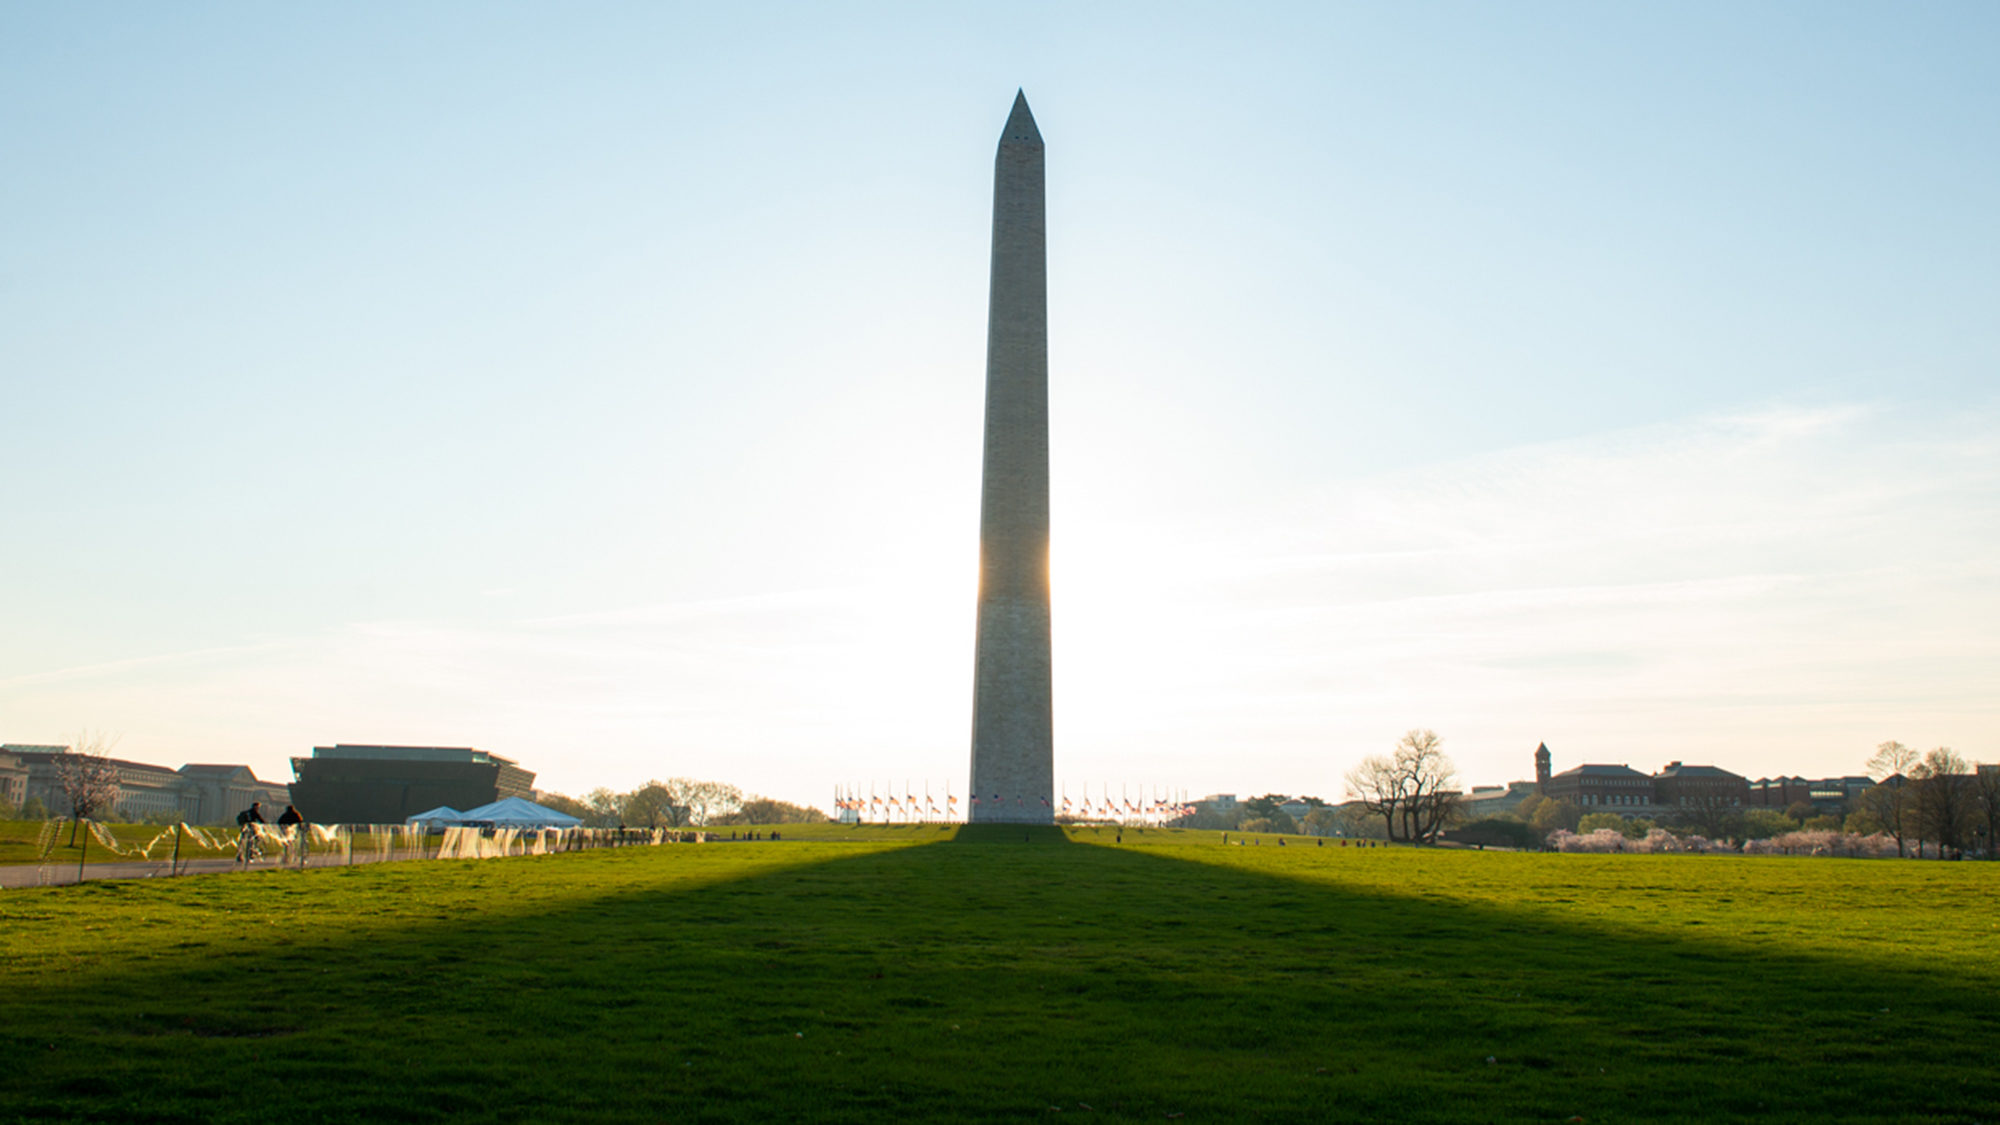 The Washington Monument stands tall surrounded by green grass on a sunny day.